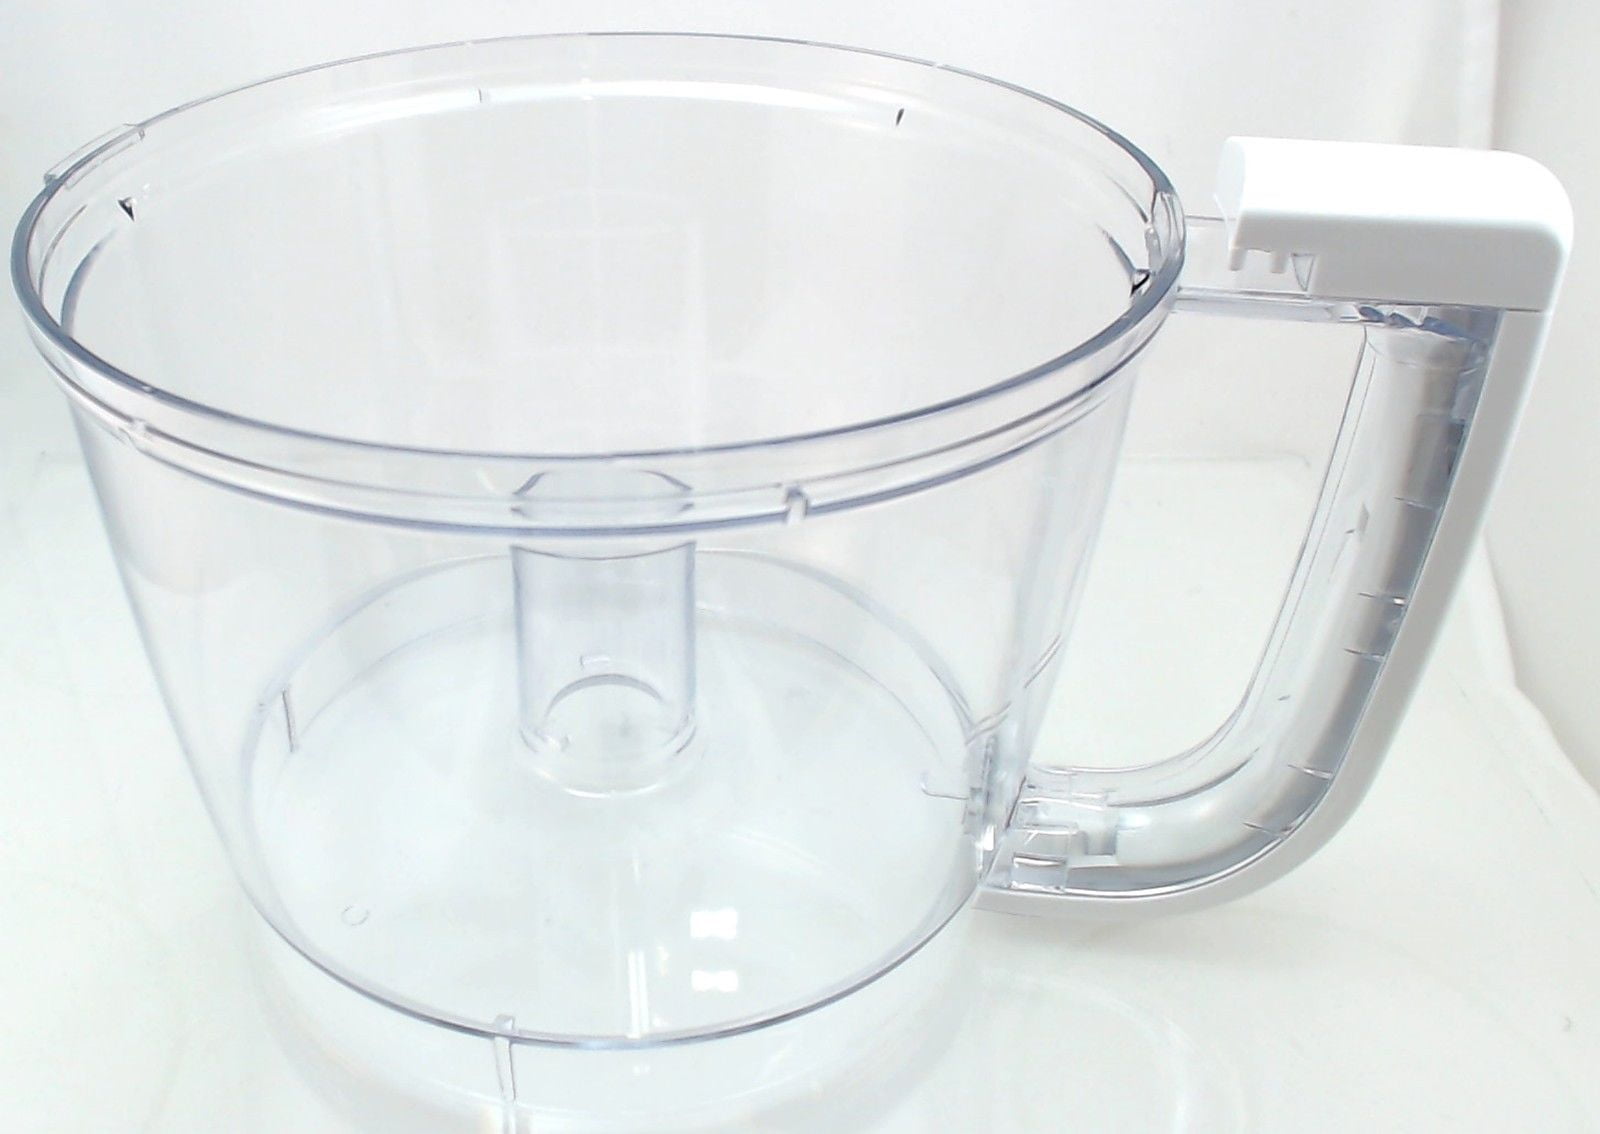 Please help me find a replacement bowl for this kitchen aid food processor!  : r/HelpMeFind